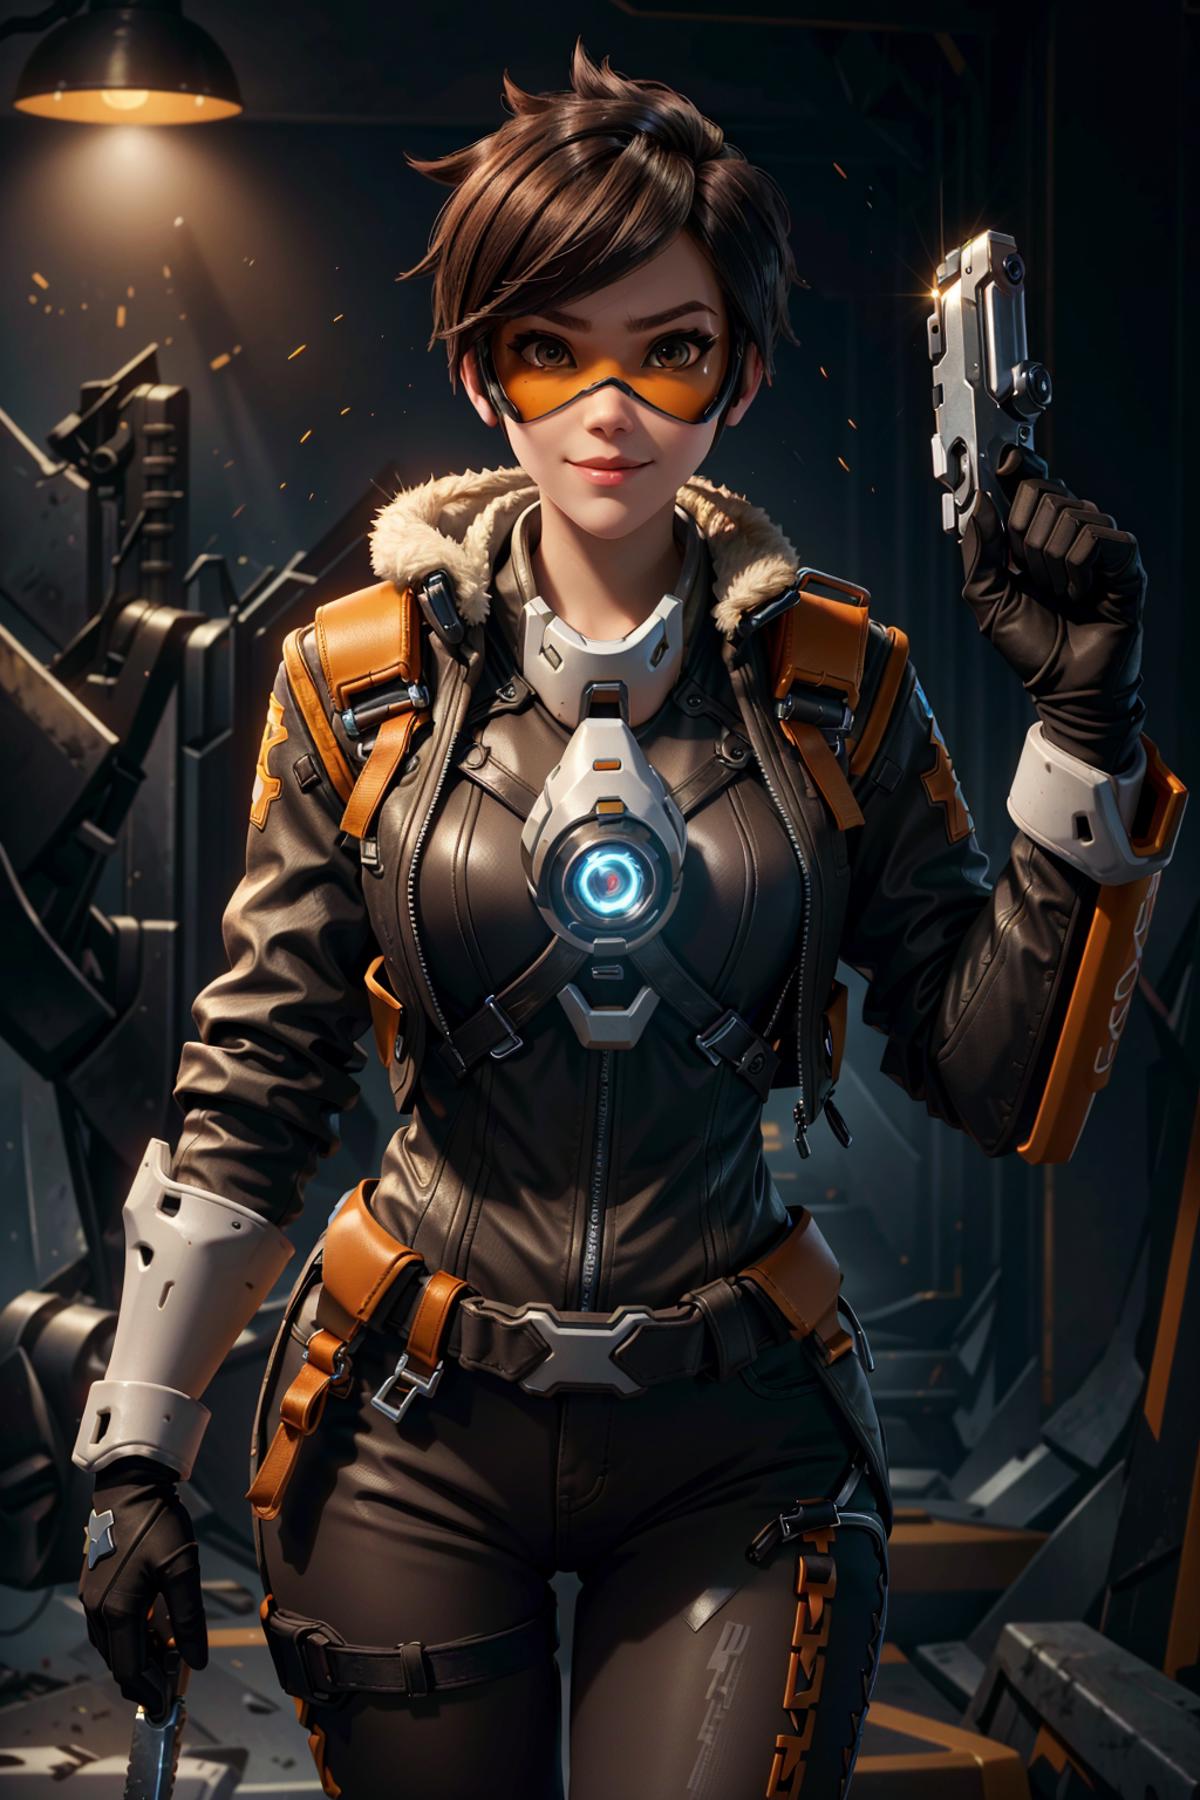 Not so Perfect - Tracer from Overwatch image by BloodRedKittie